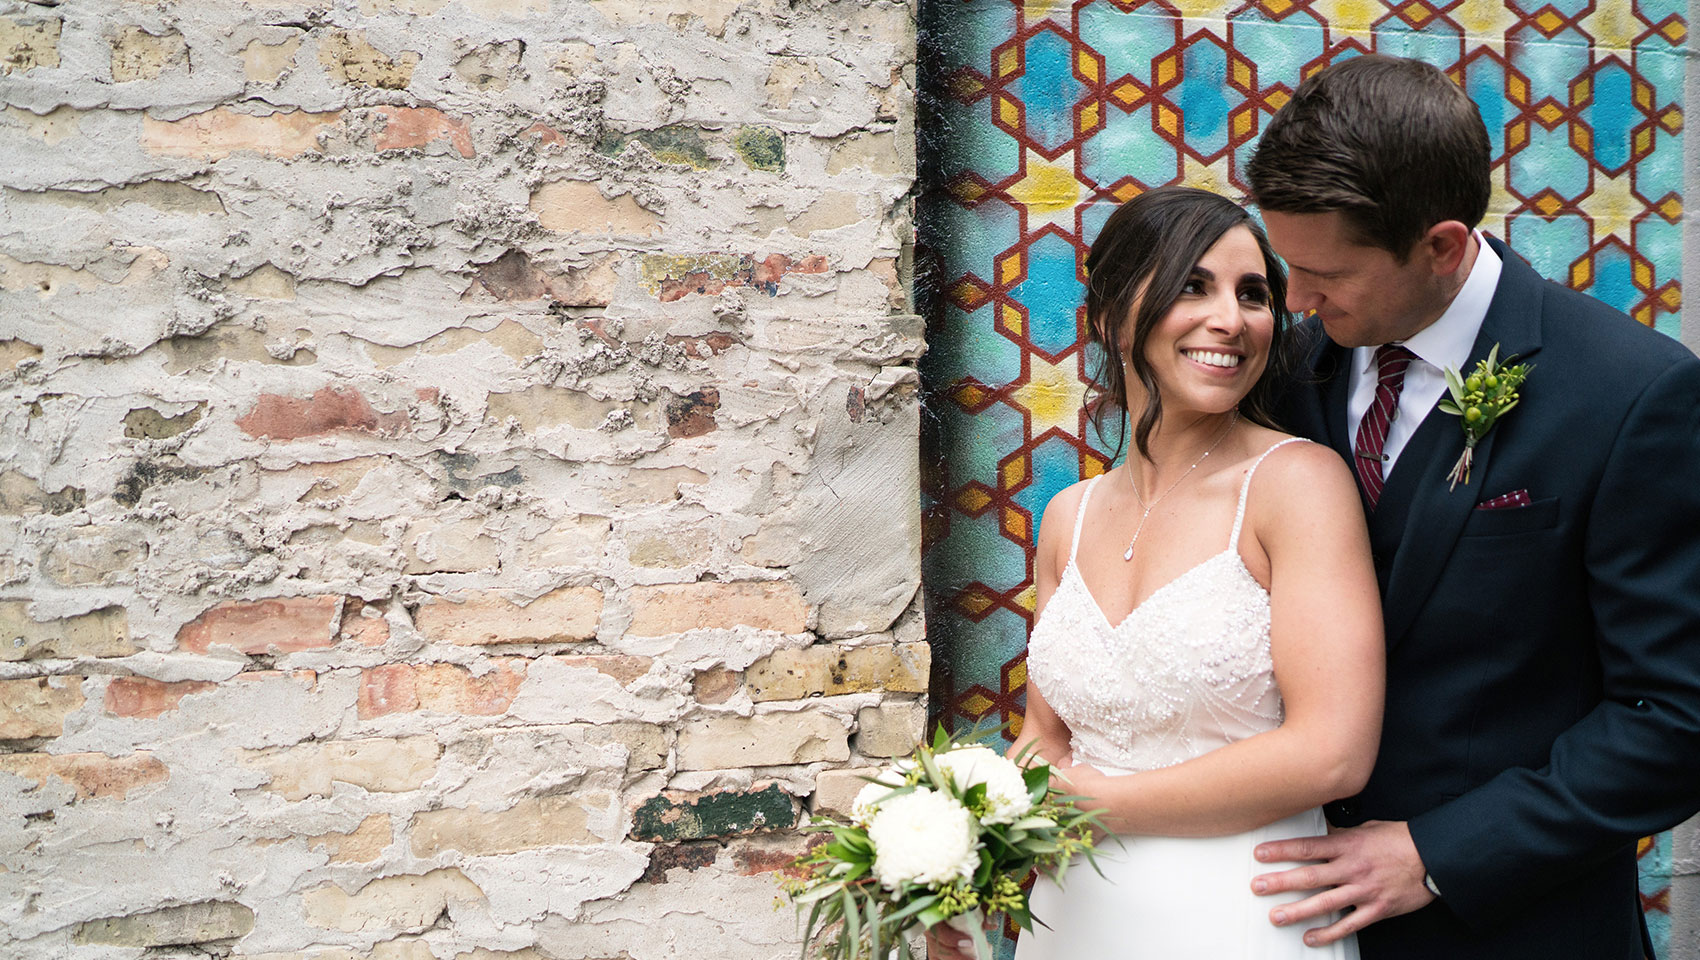 Couple in front of brick wall and mosaic